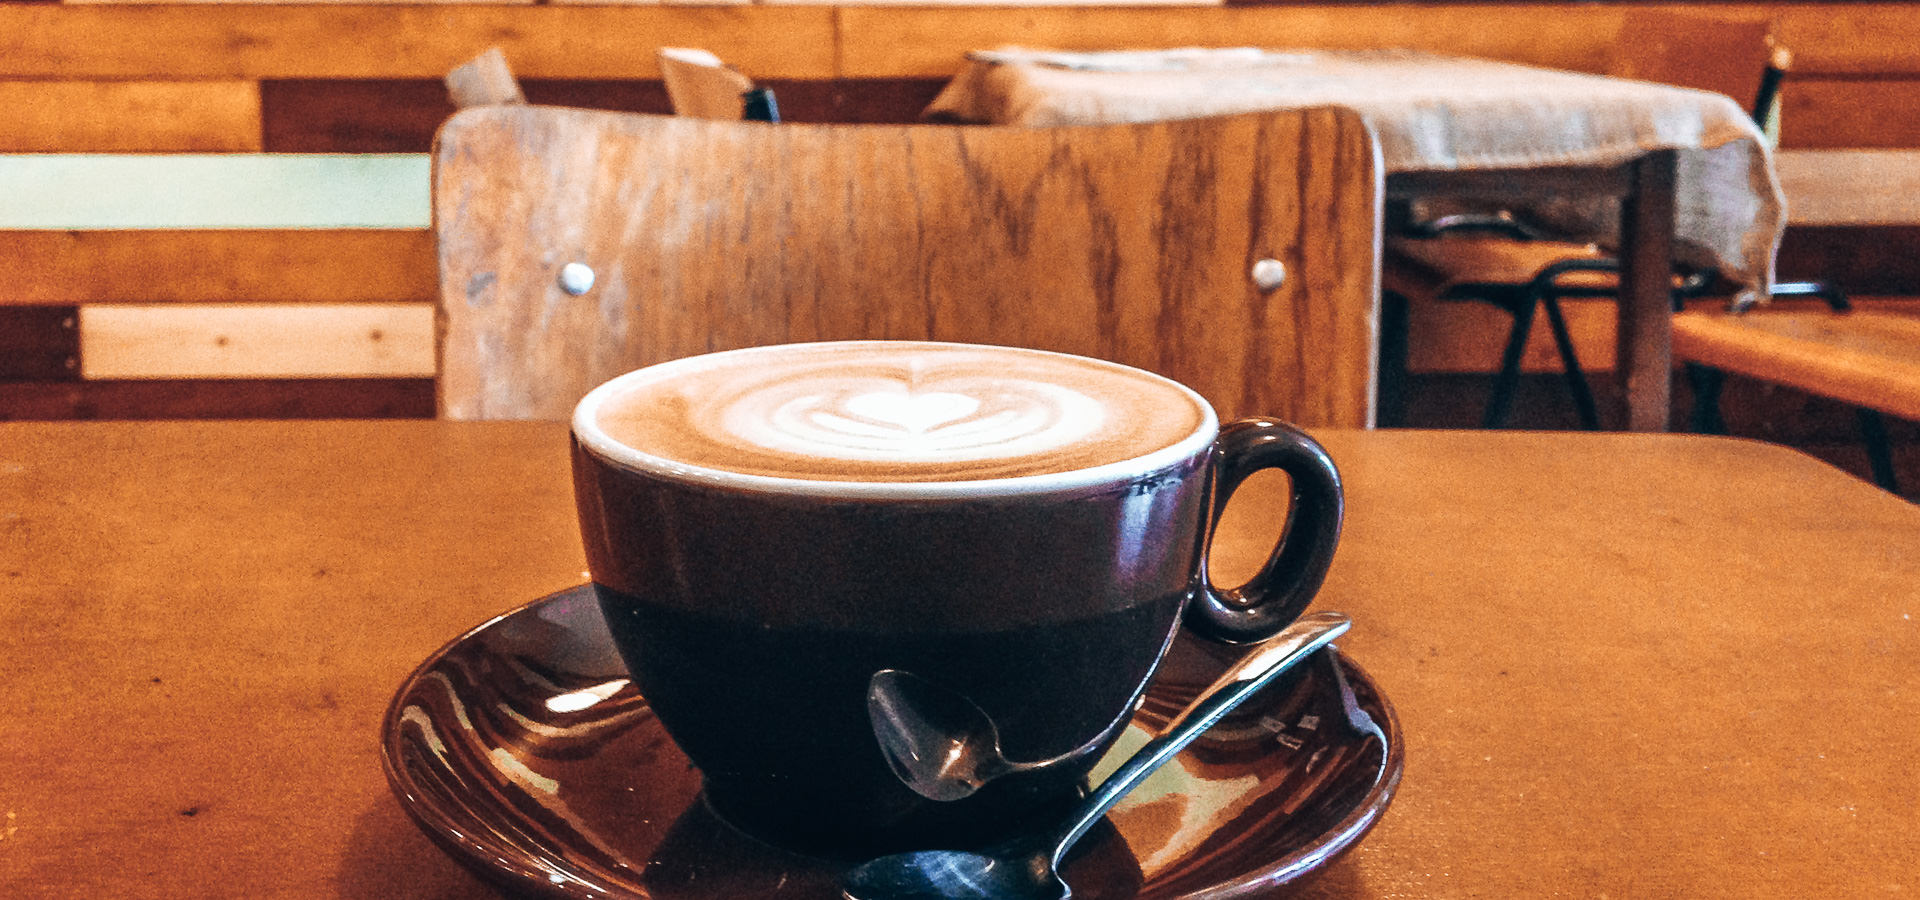 Best Specialty Coffee Amsterdam: 9 Unmissable Cafes | non touristy weekend guide amsterdam 2